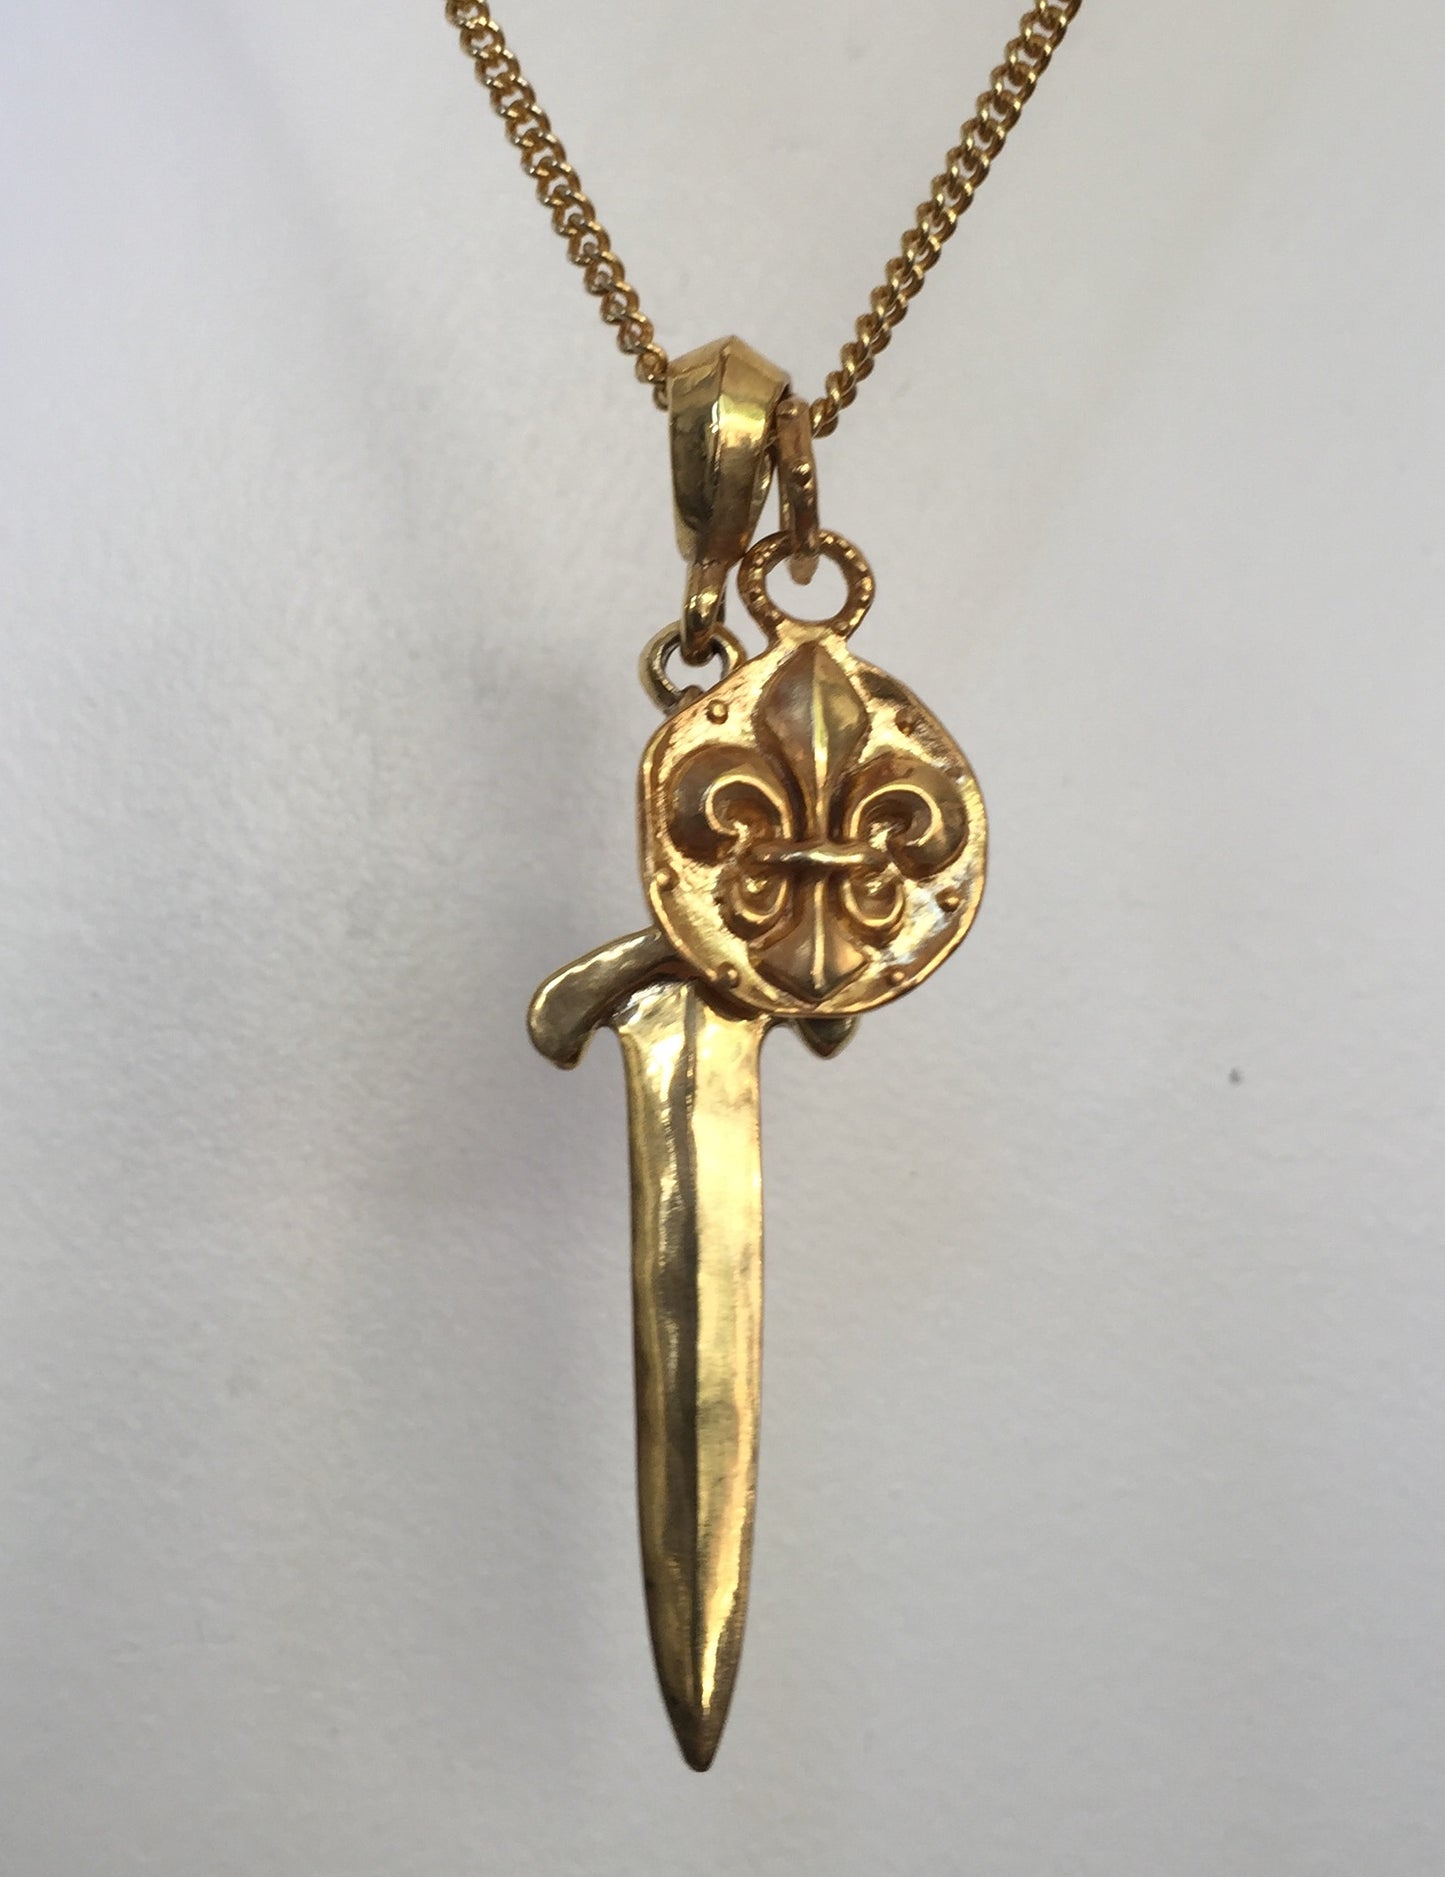 Necklace - Sword with Knight Medallion